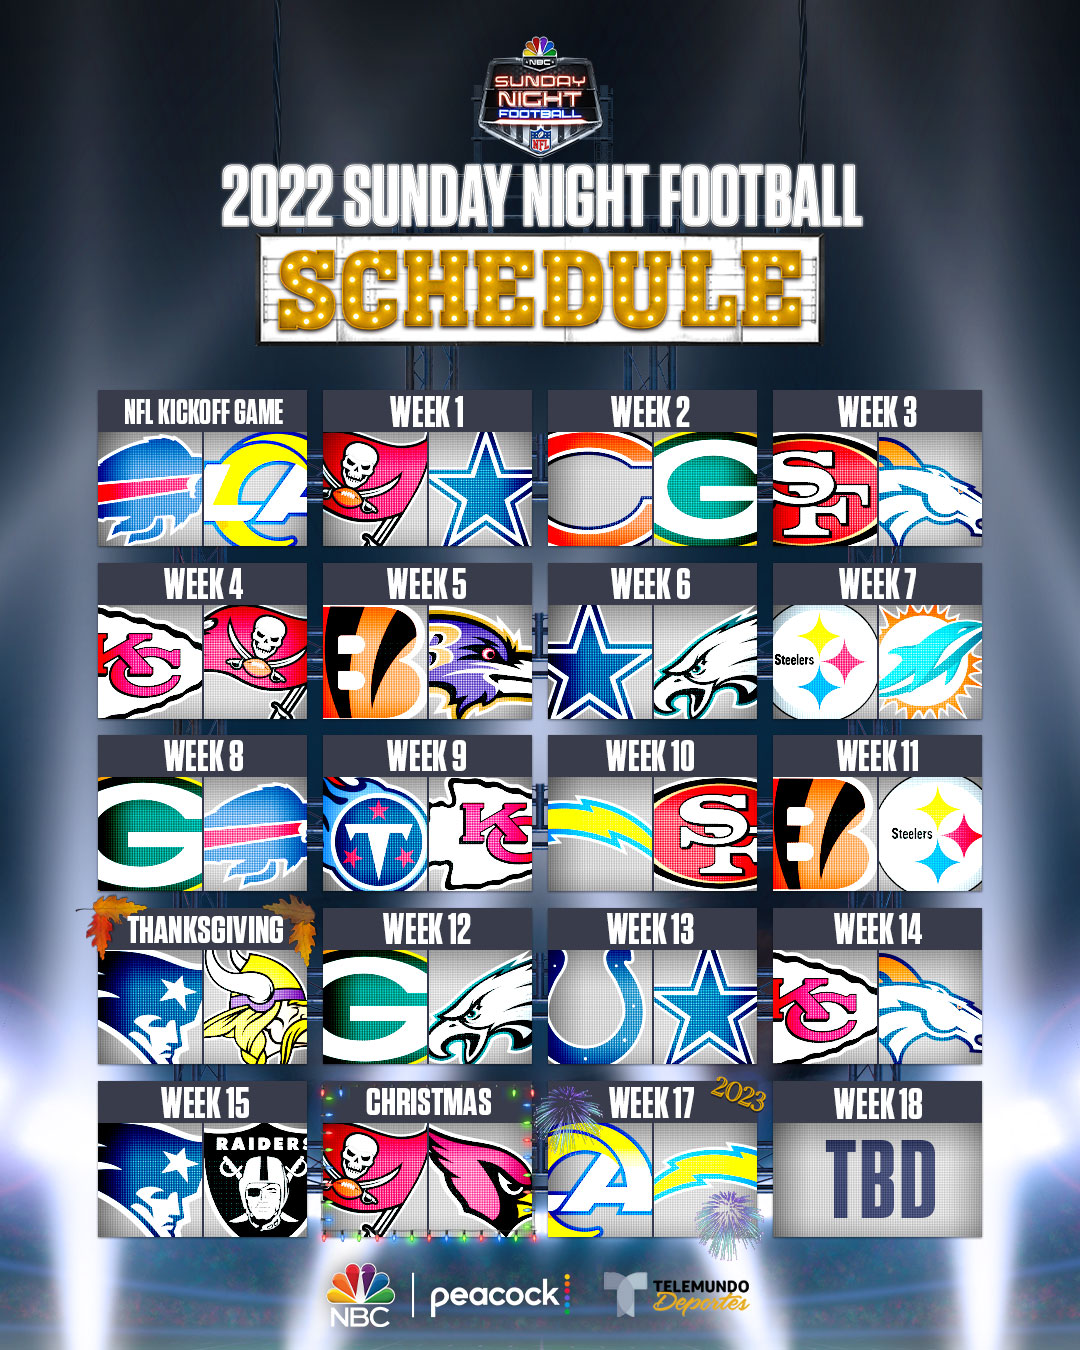 SUNDAY NIGHT FOOTBALL IS AGAIN HOME TO THE BEST & BRIGHTEST IN